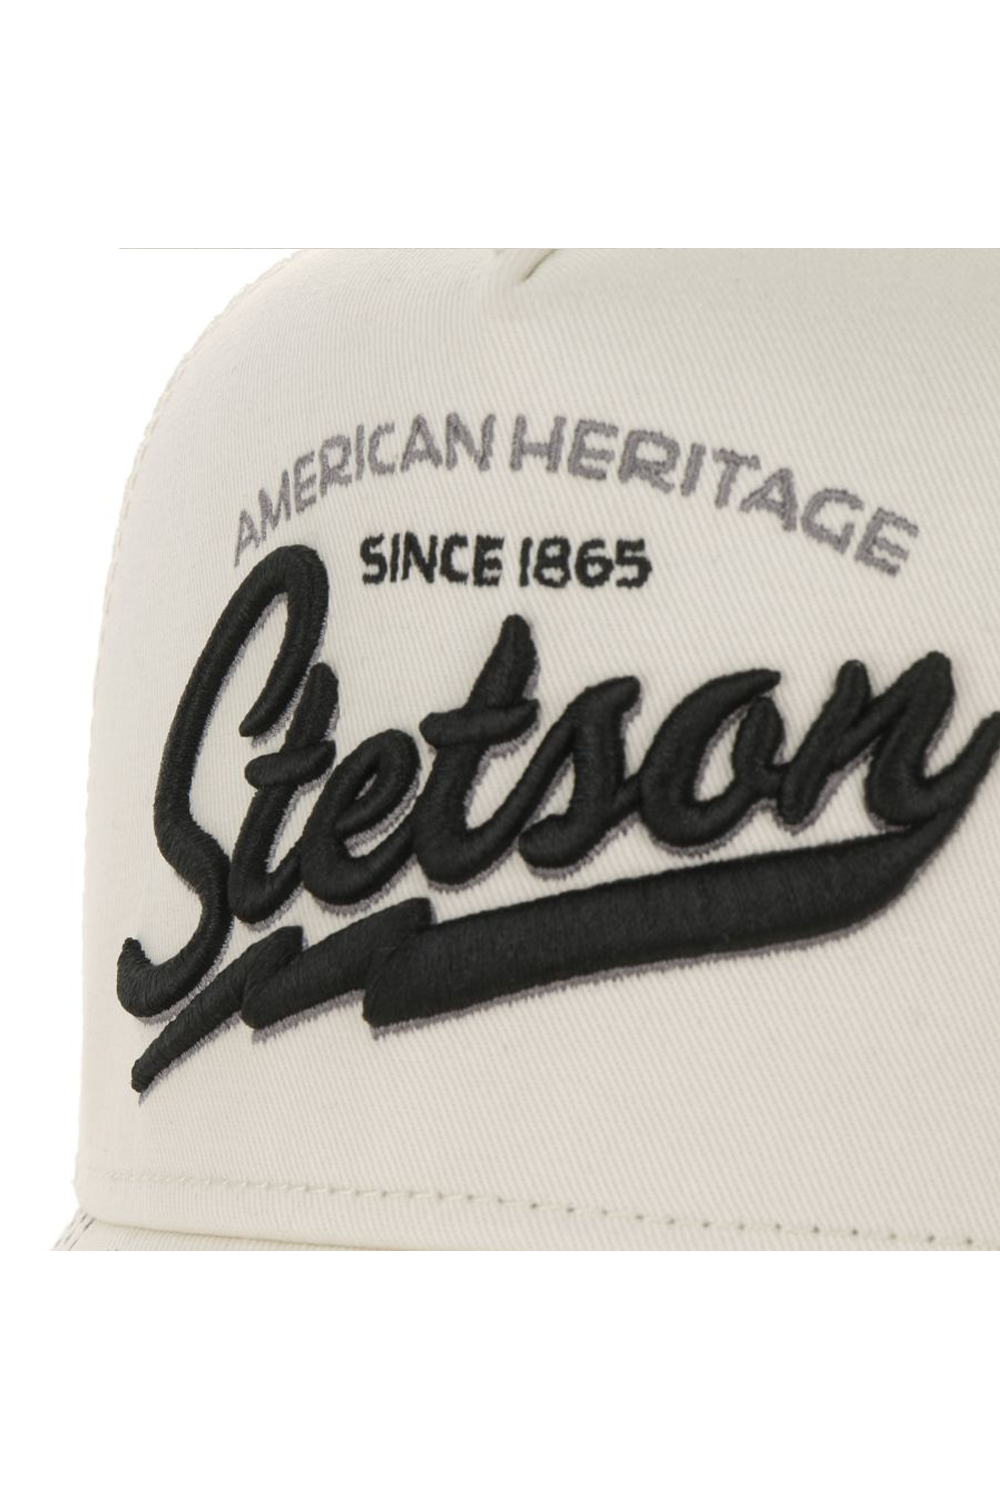 Buy the Stetson Since 1865 Trucker Cap in Cream/White at Intro. Spend £50 for free UK delivery. Official stockists. We ship worldwide.